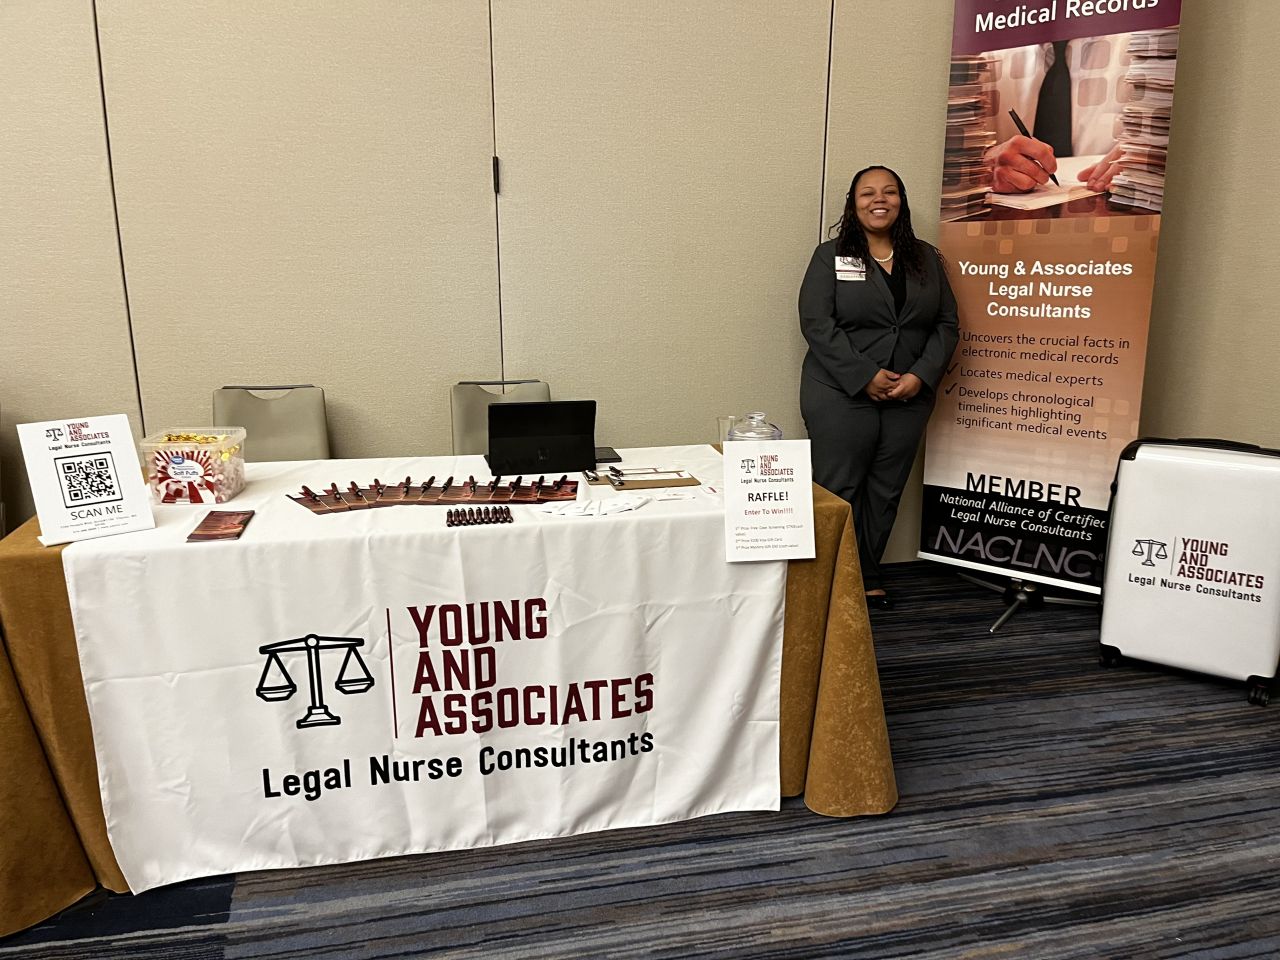 Young and Associates Legal Nurse Consultants